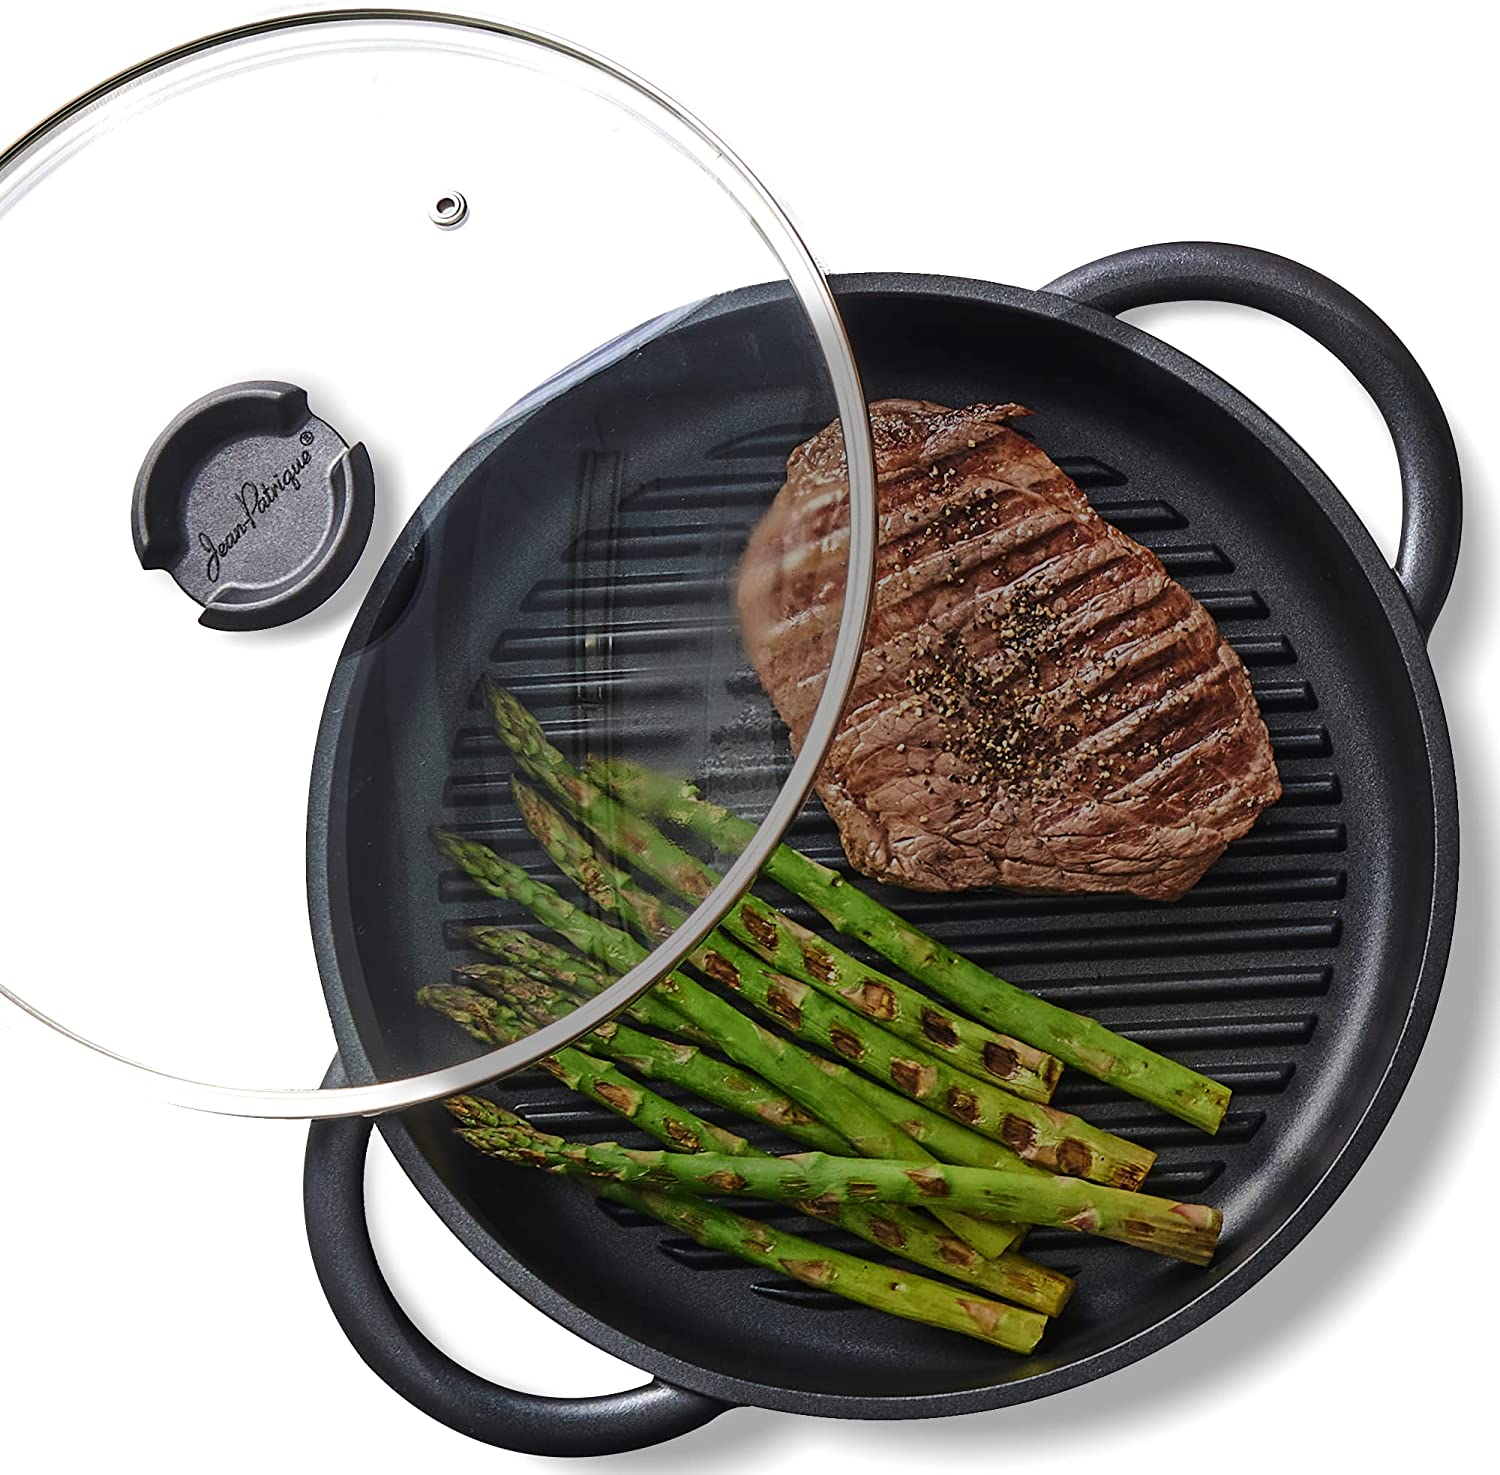 Jean-Patrique Oven-Friendly Daily Nonstick Grill Pan, 10.6-Inch